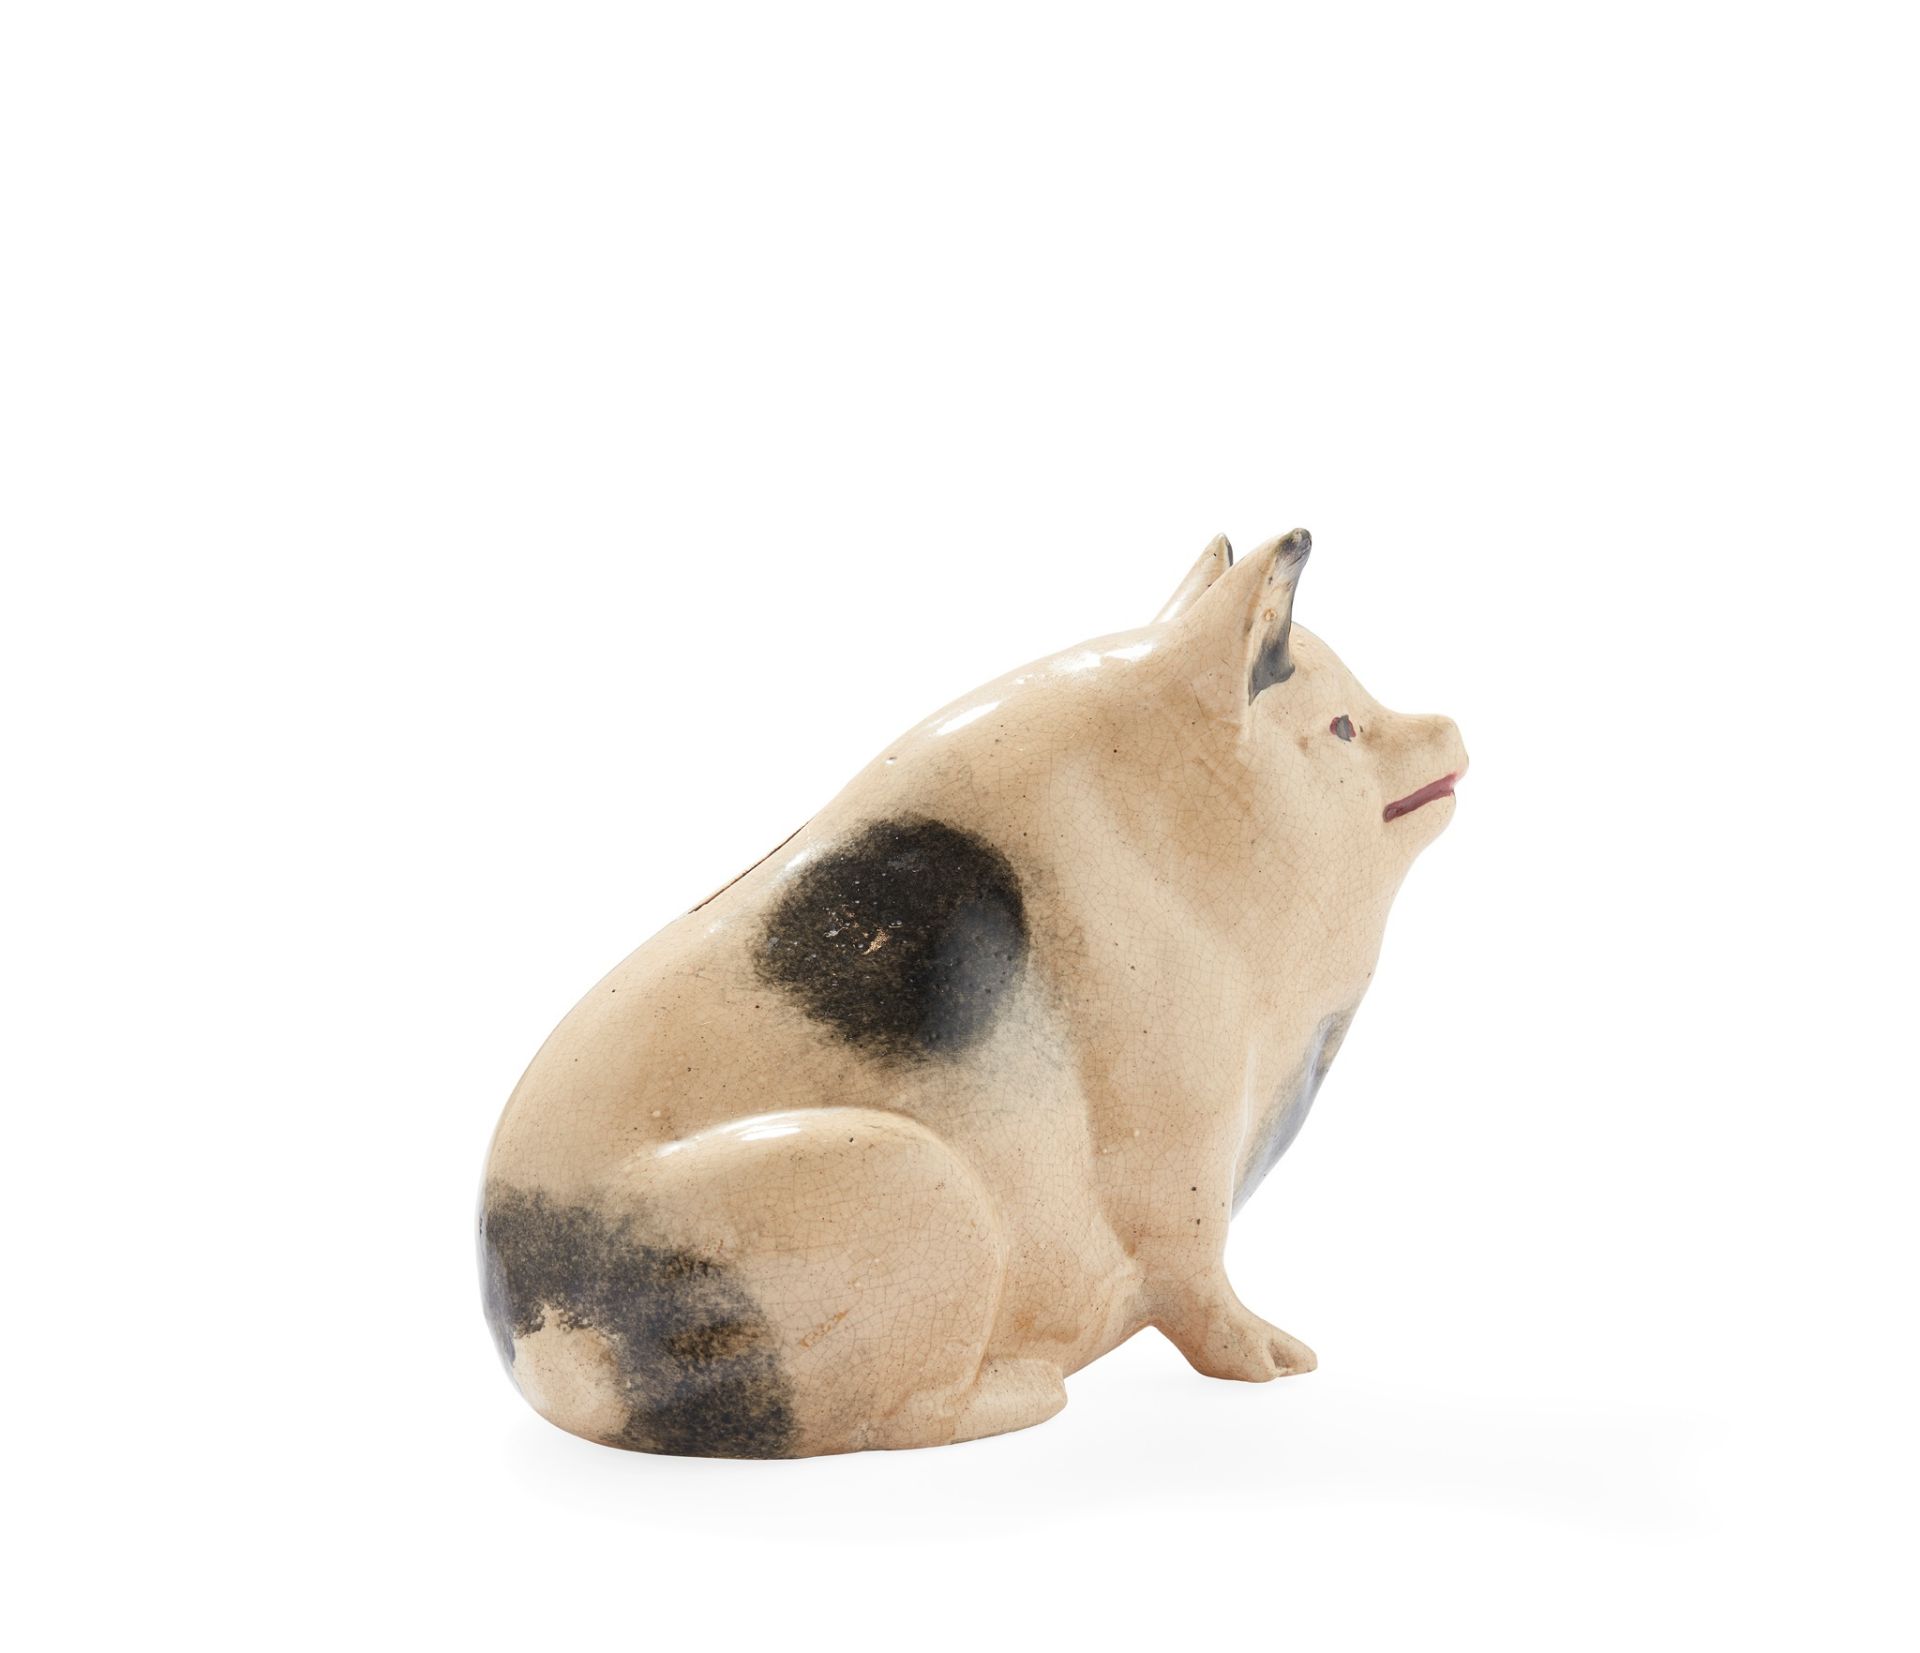 A SCOTTISH POTTERY MONEY BANK PIG EARLY 20TH CENTURY - Image 2 of 2